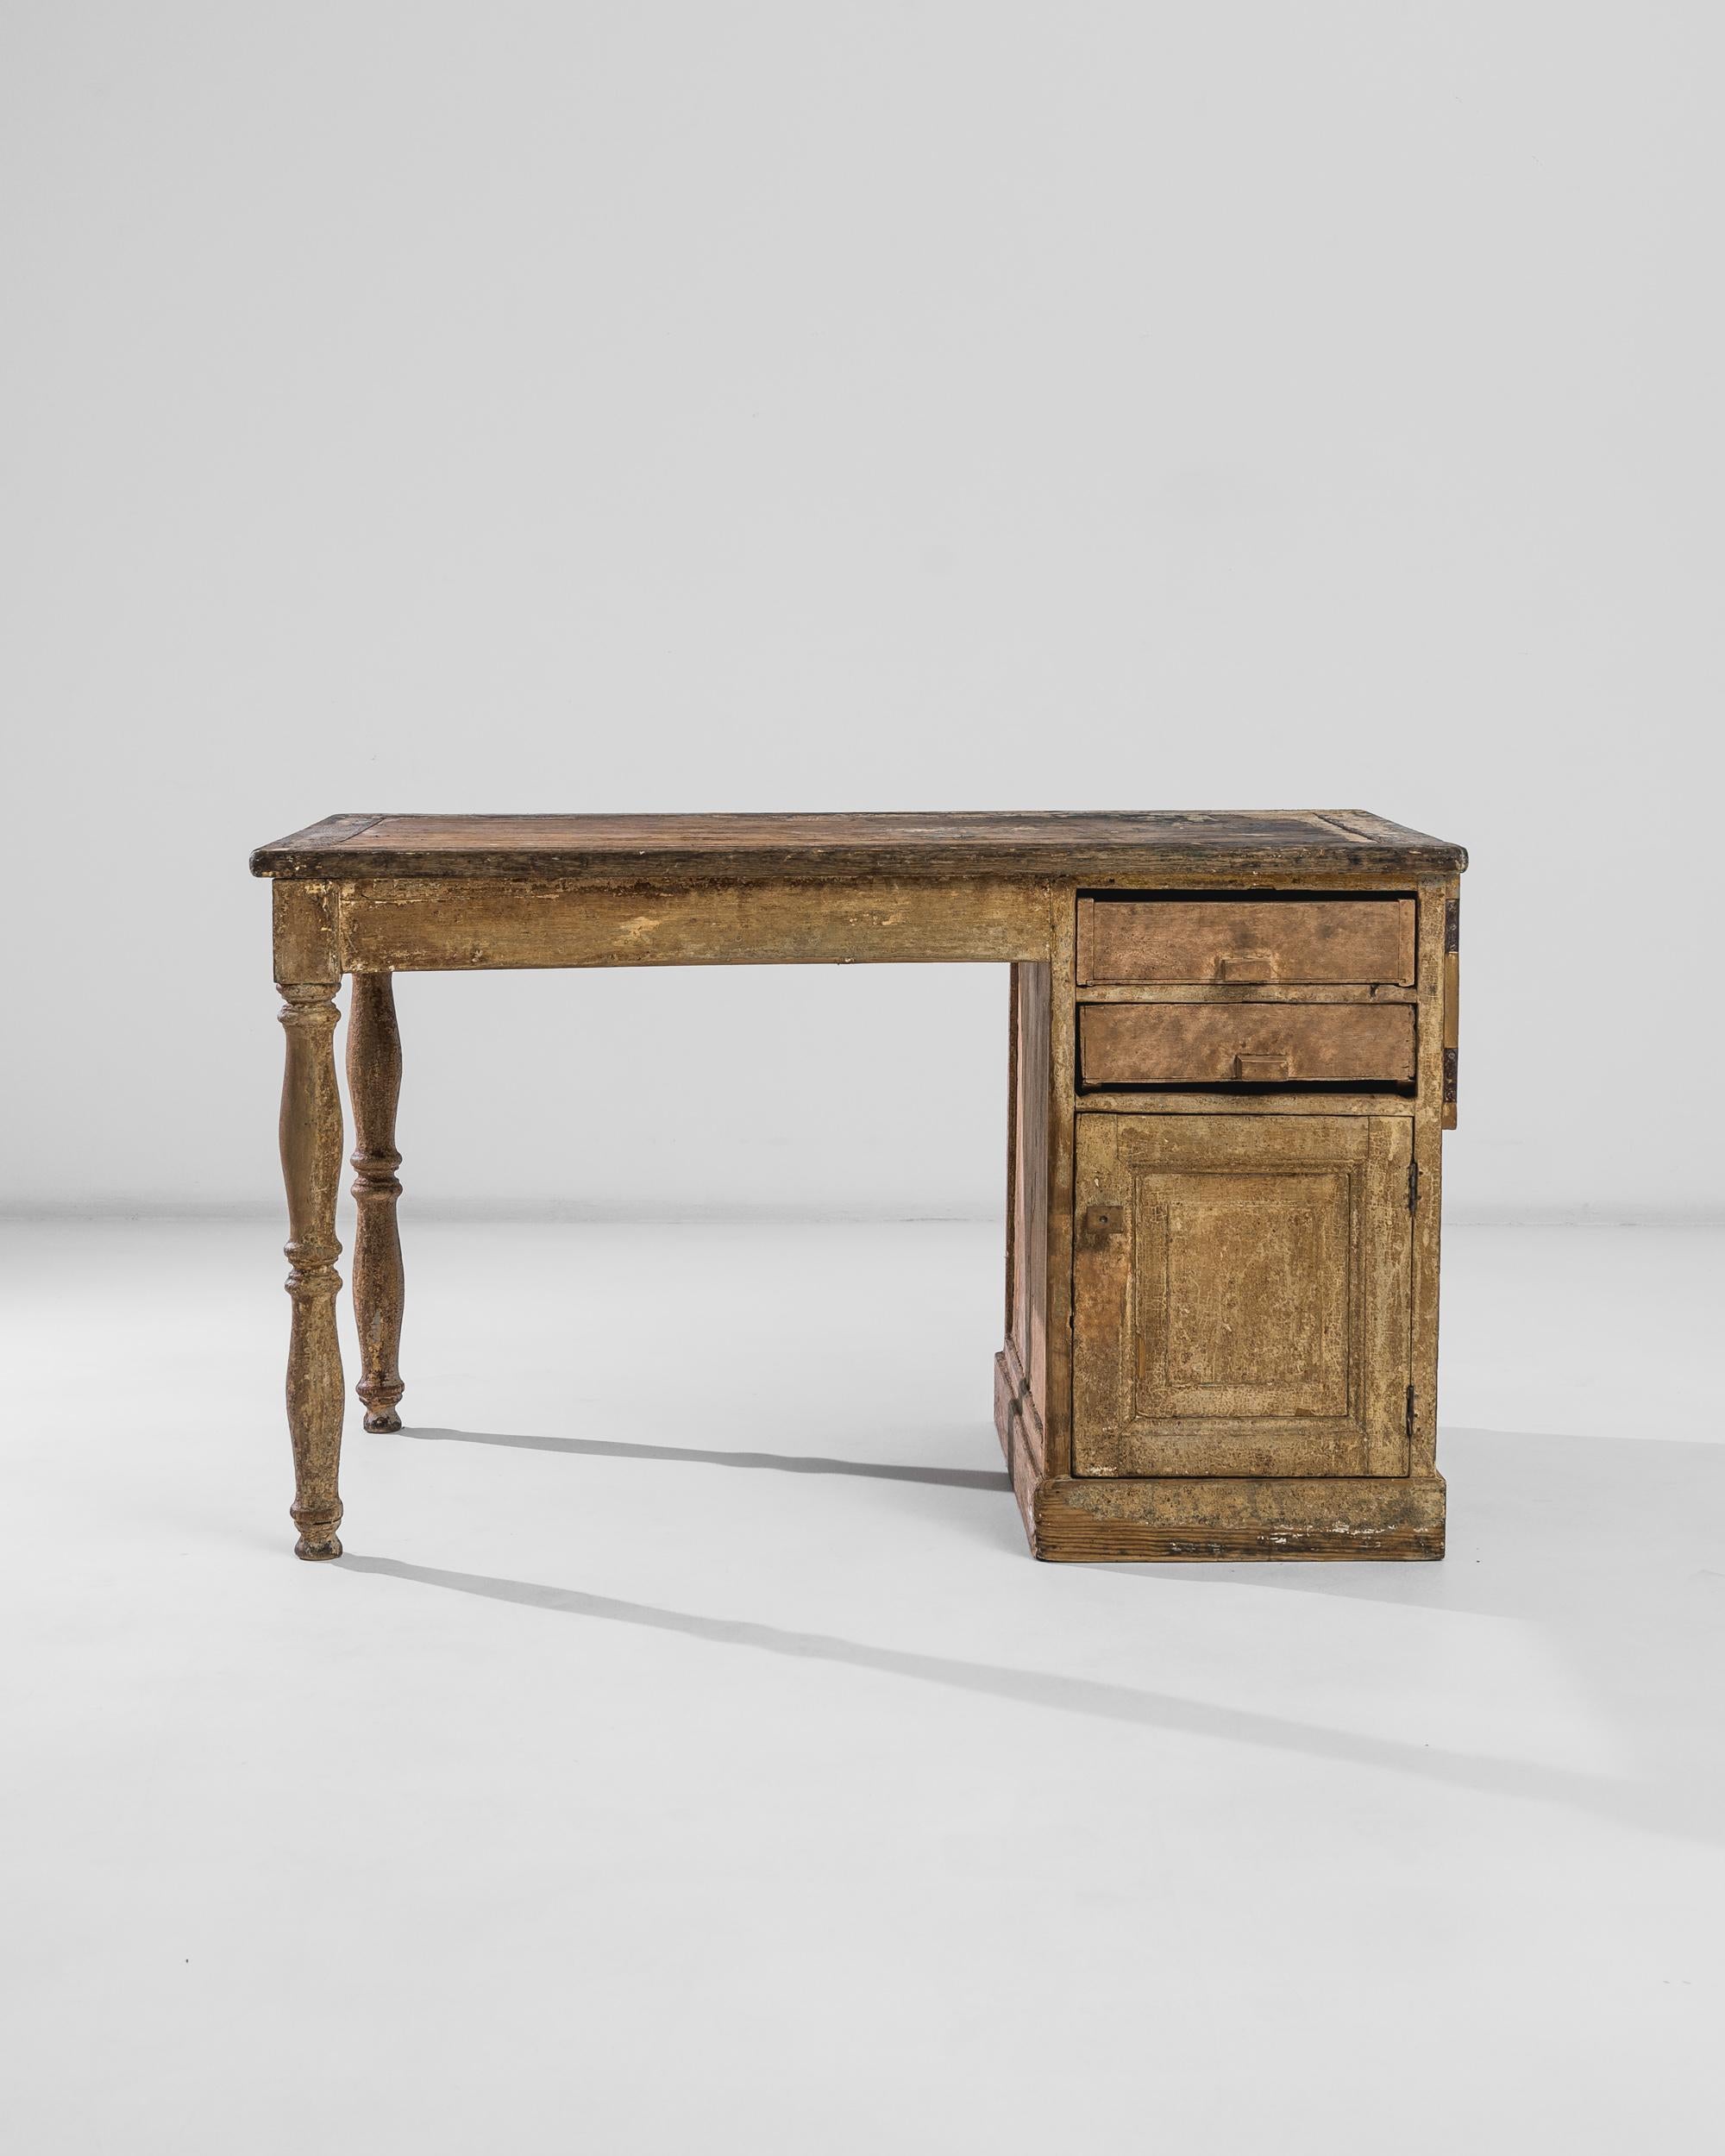 An asymmetric writing desk from turn of the century France, featuring ring turned legs and a pedestal two-drawer cabinet. The flavourful century-old patina blossoms in a myriad of honeycomb tones and nuances, flourishing in a heavy grain and